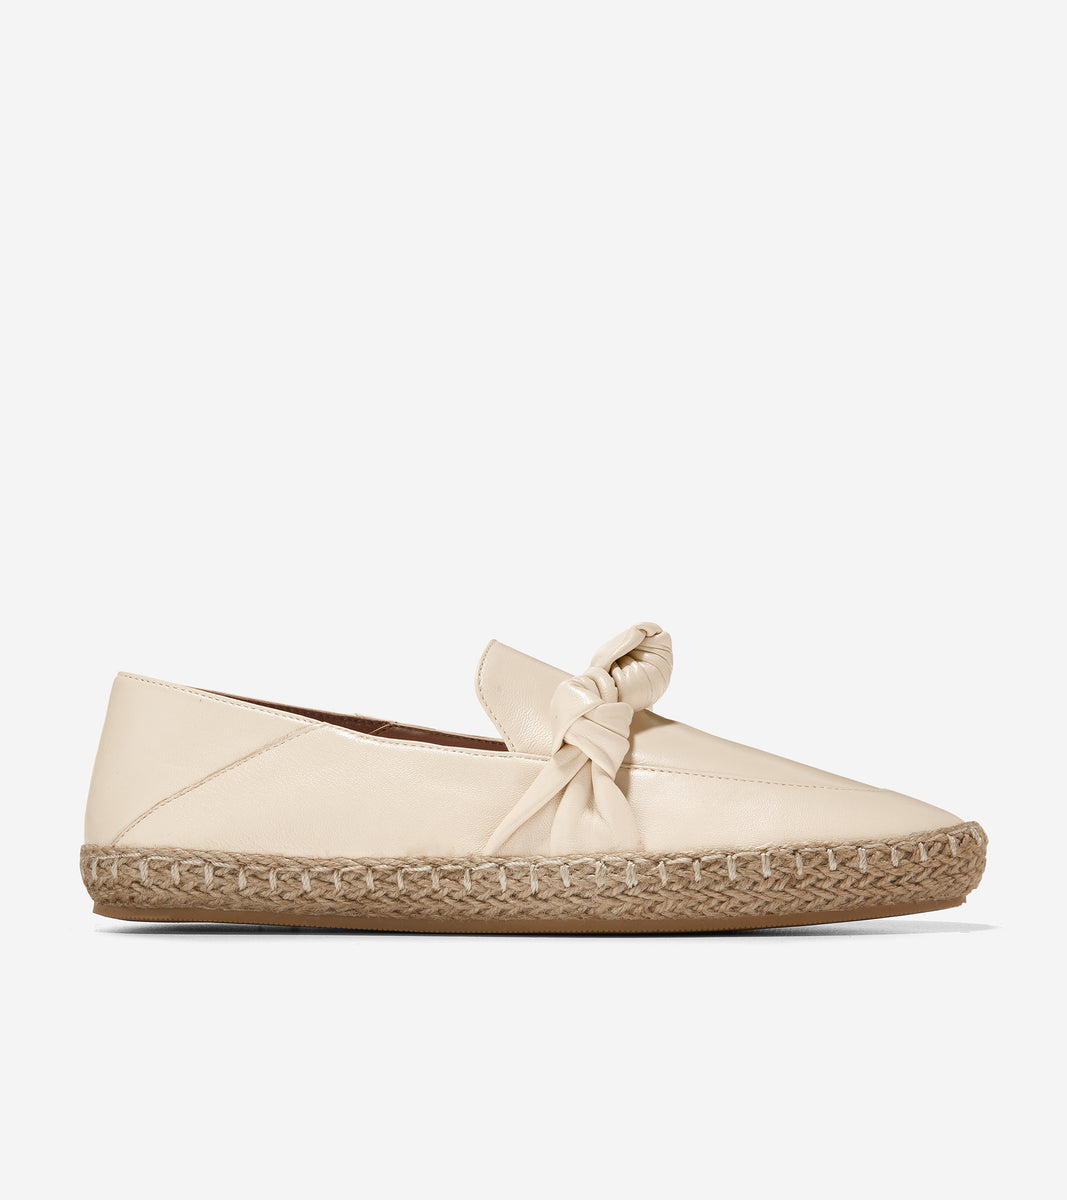 w28160-Women's Cloudfeel Knotted Espadrille-Angora Leather